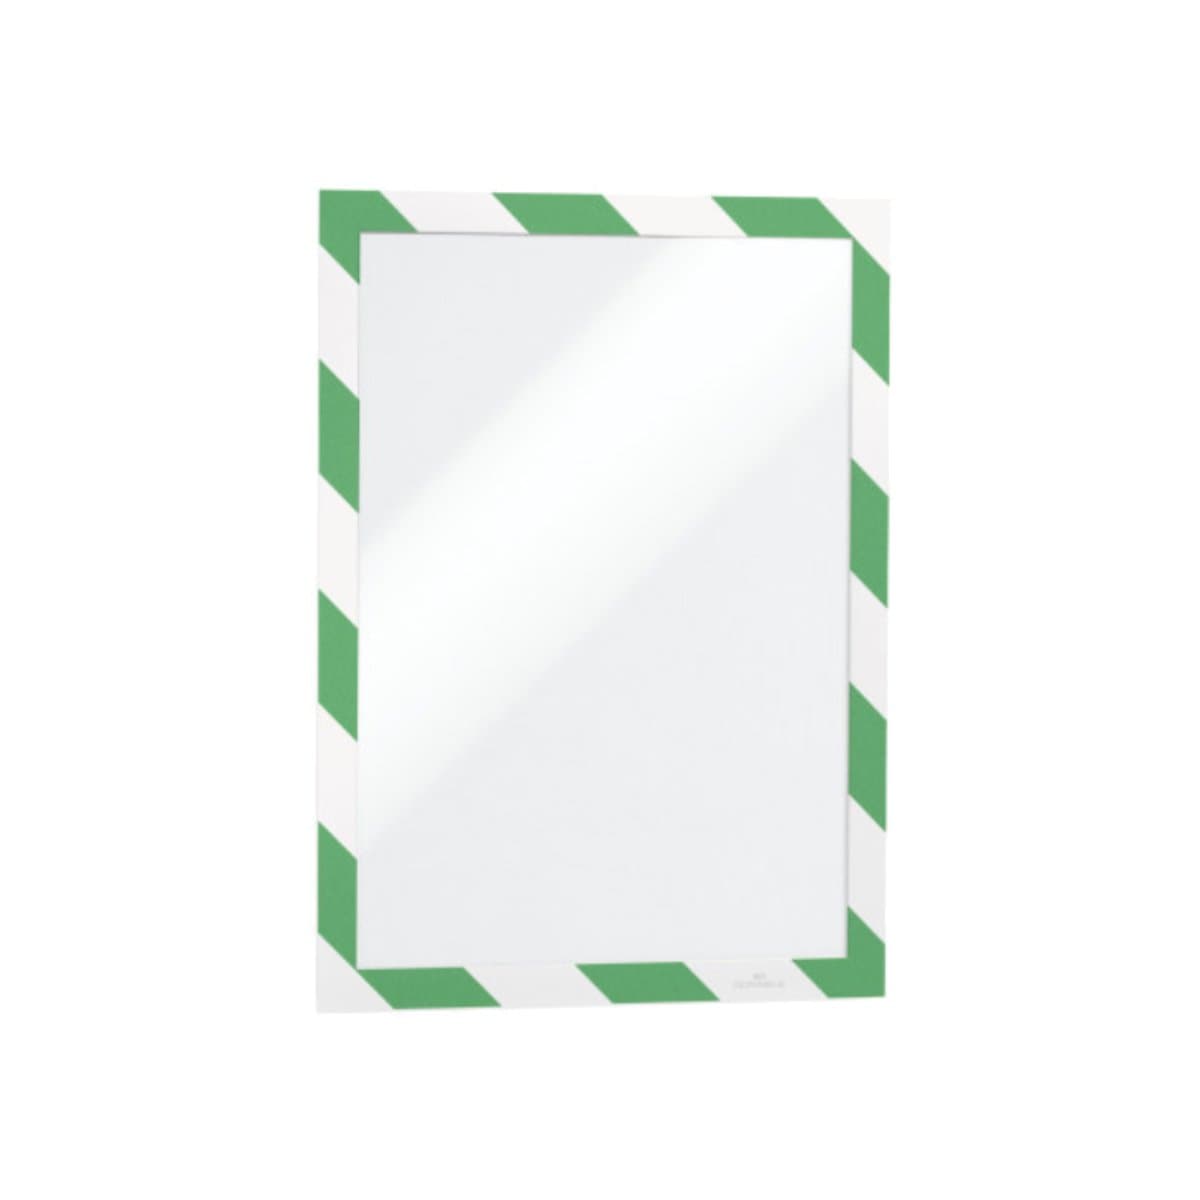 Durable DURAFRAME Security, Self-Adhesive Magnetic Frame A4, 2/pack, Green/White